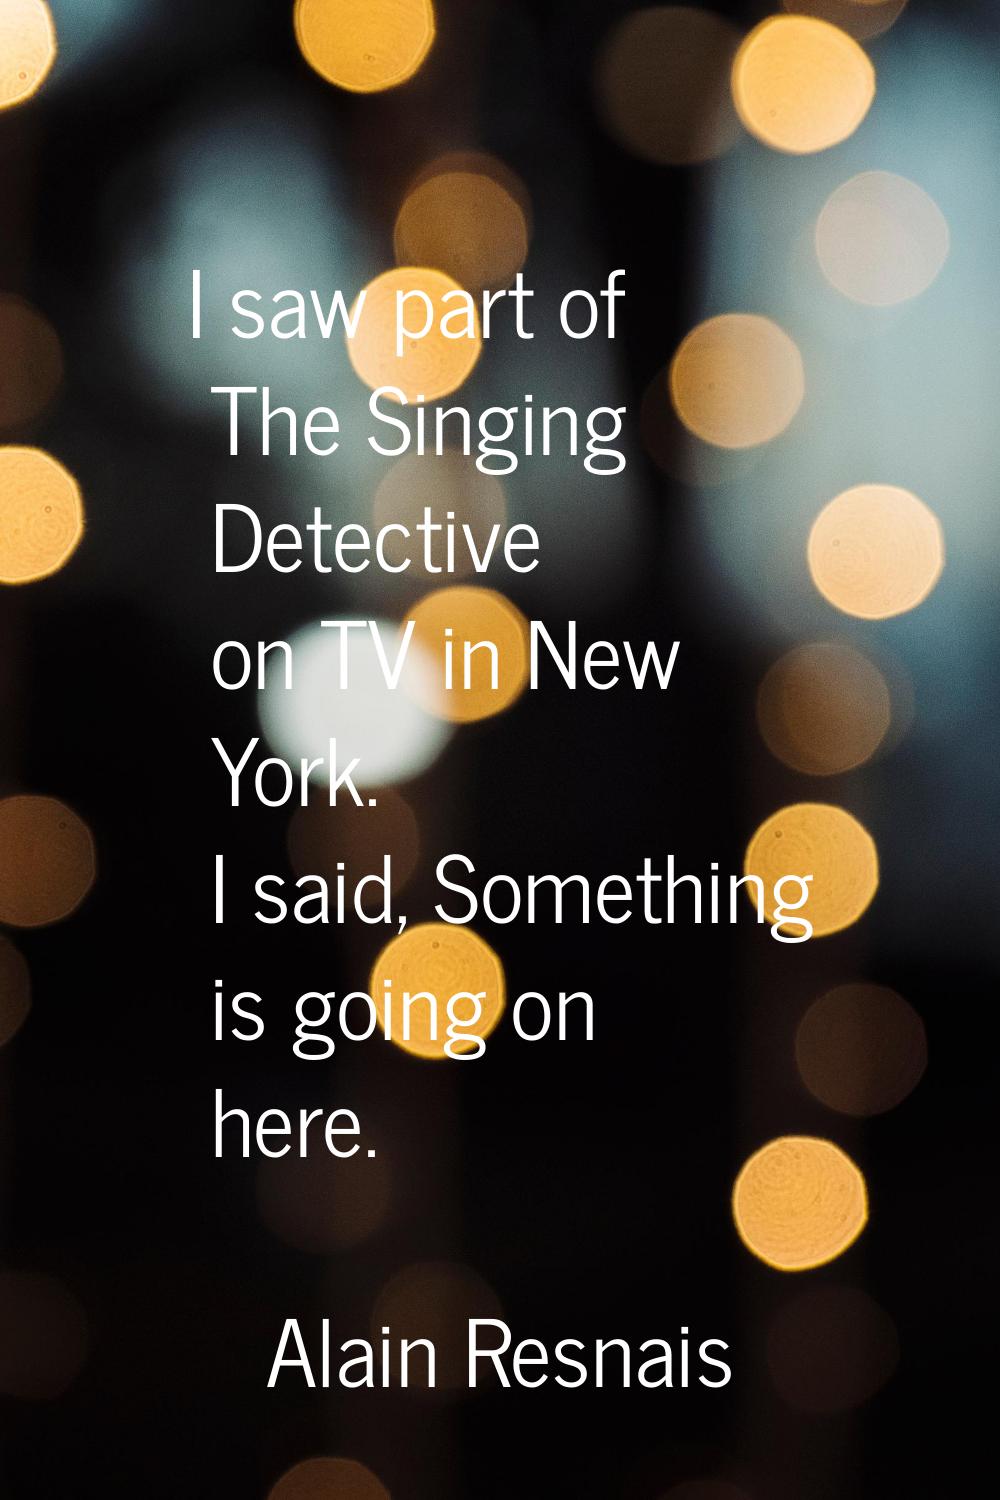 I saw part of The Singing Detective on TV in New York. I said, Something is going on here.